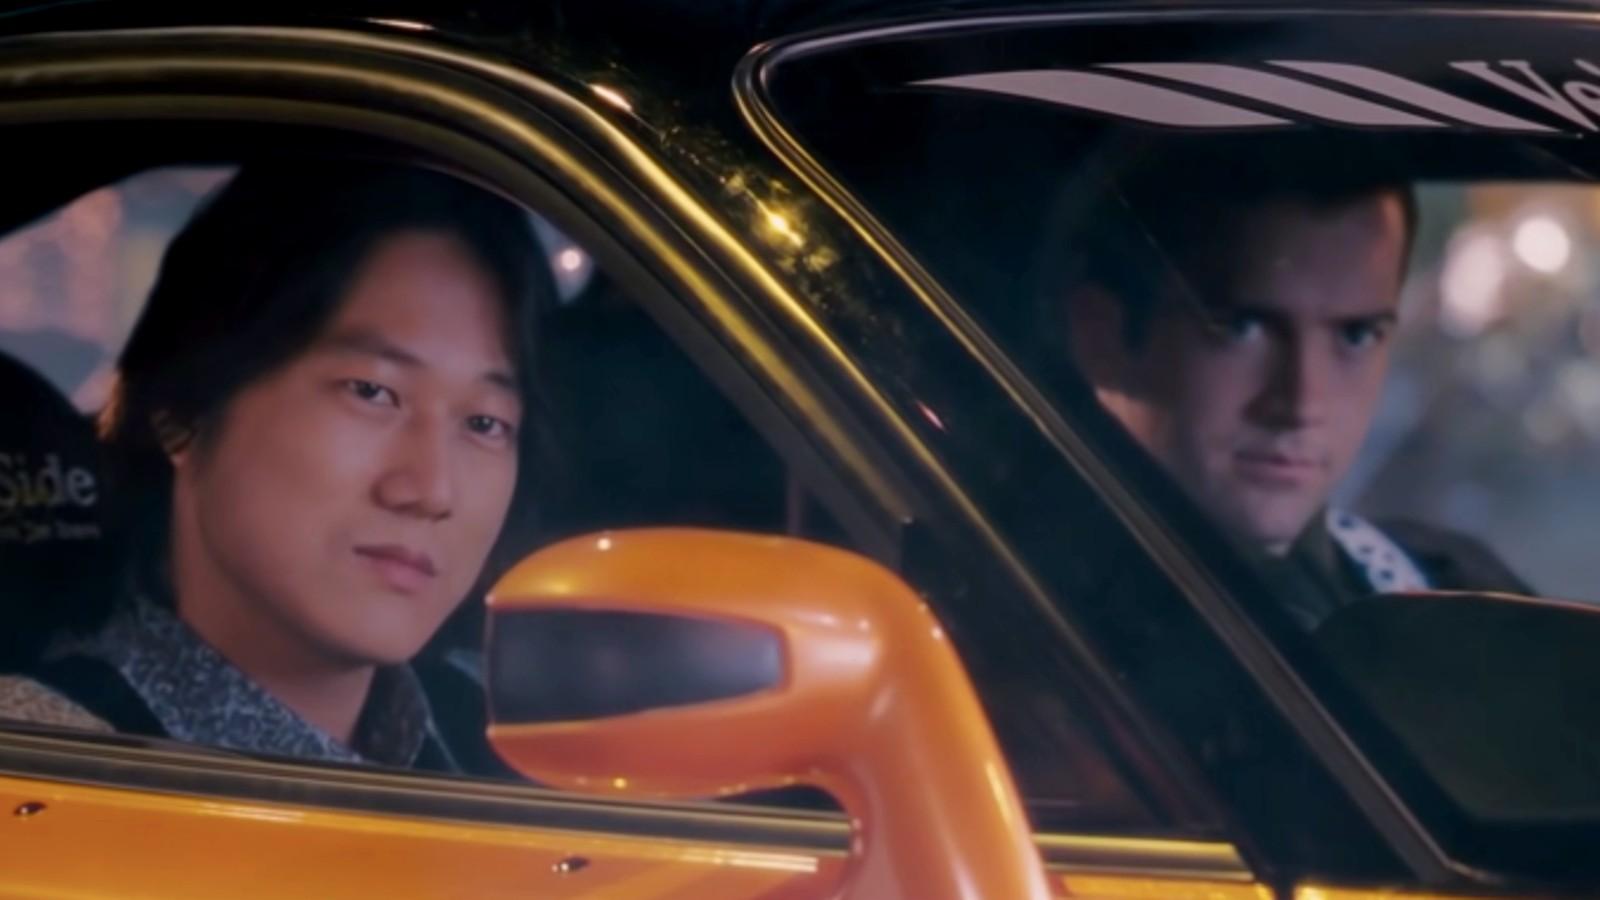 When does Tokyo Drift take place in the Fast and Furious timeline